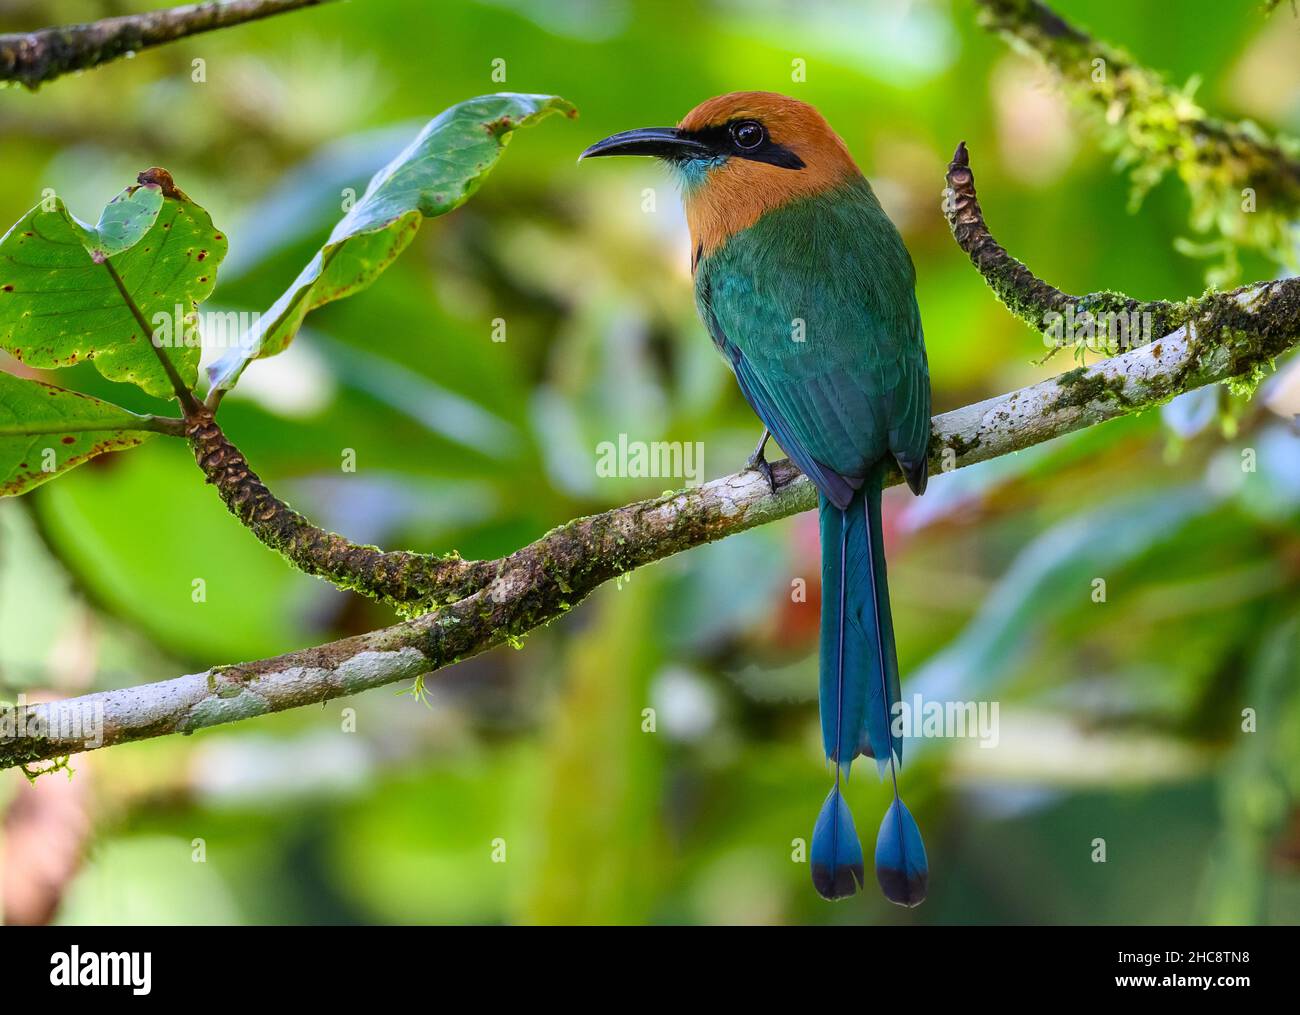 A Broad-billed Motmot (Electron platyrhynchum) perched on a branch. Costa Rica. Stock Photo